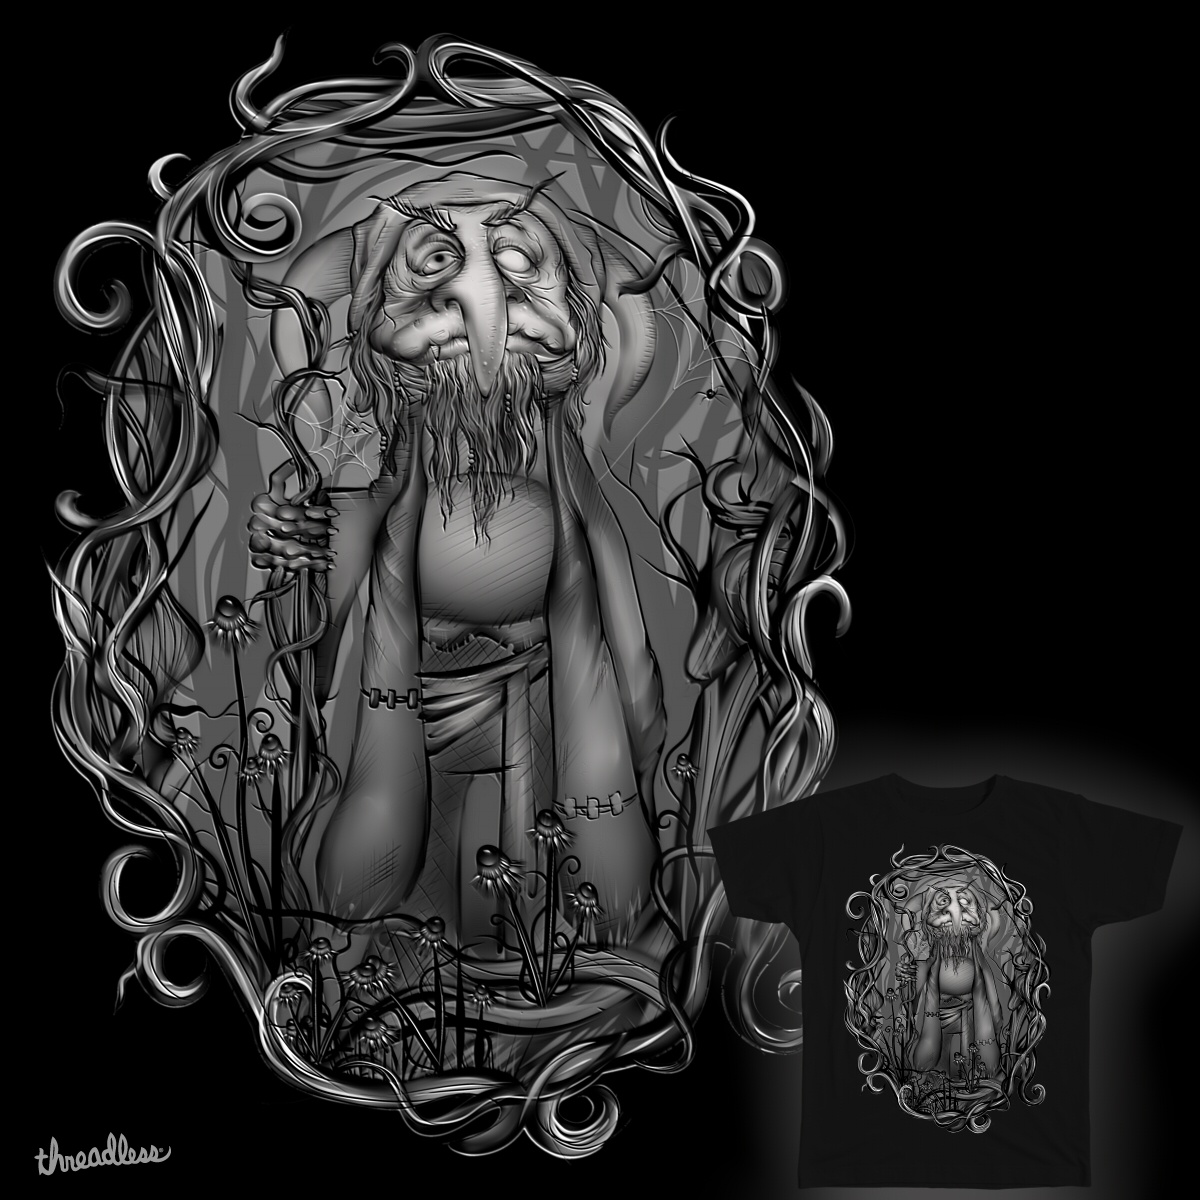 Goblin in the wood, a cool t-shirt design